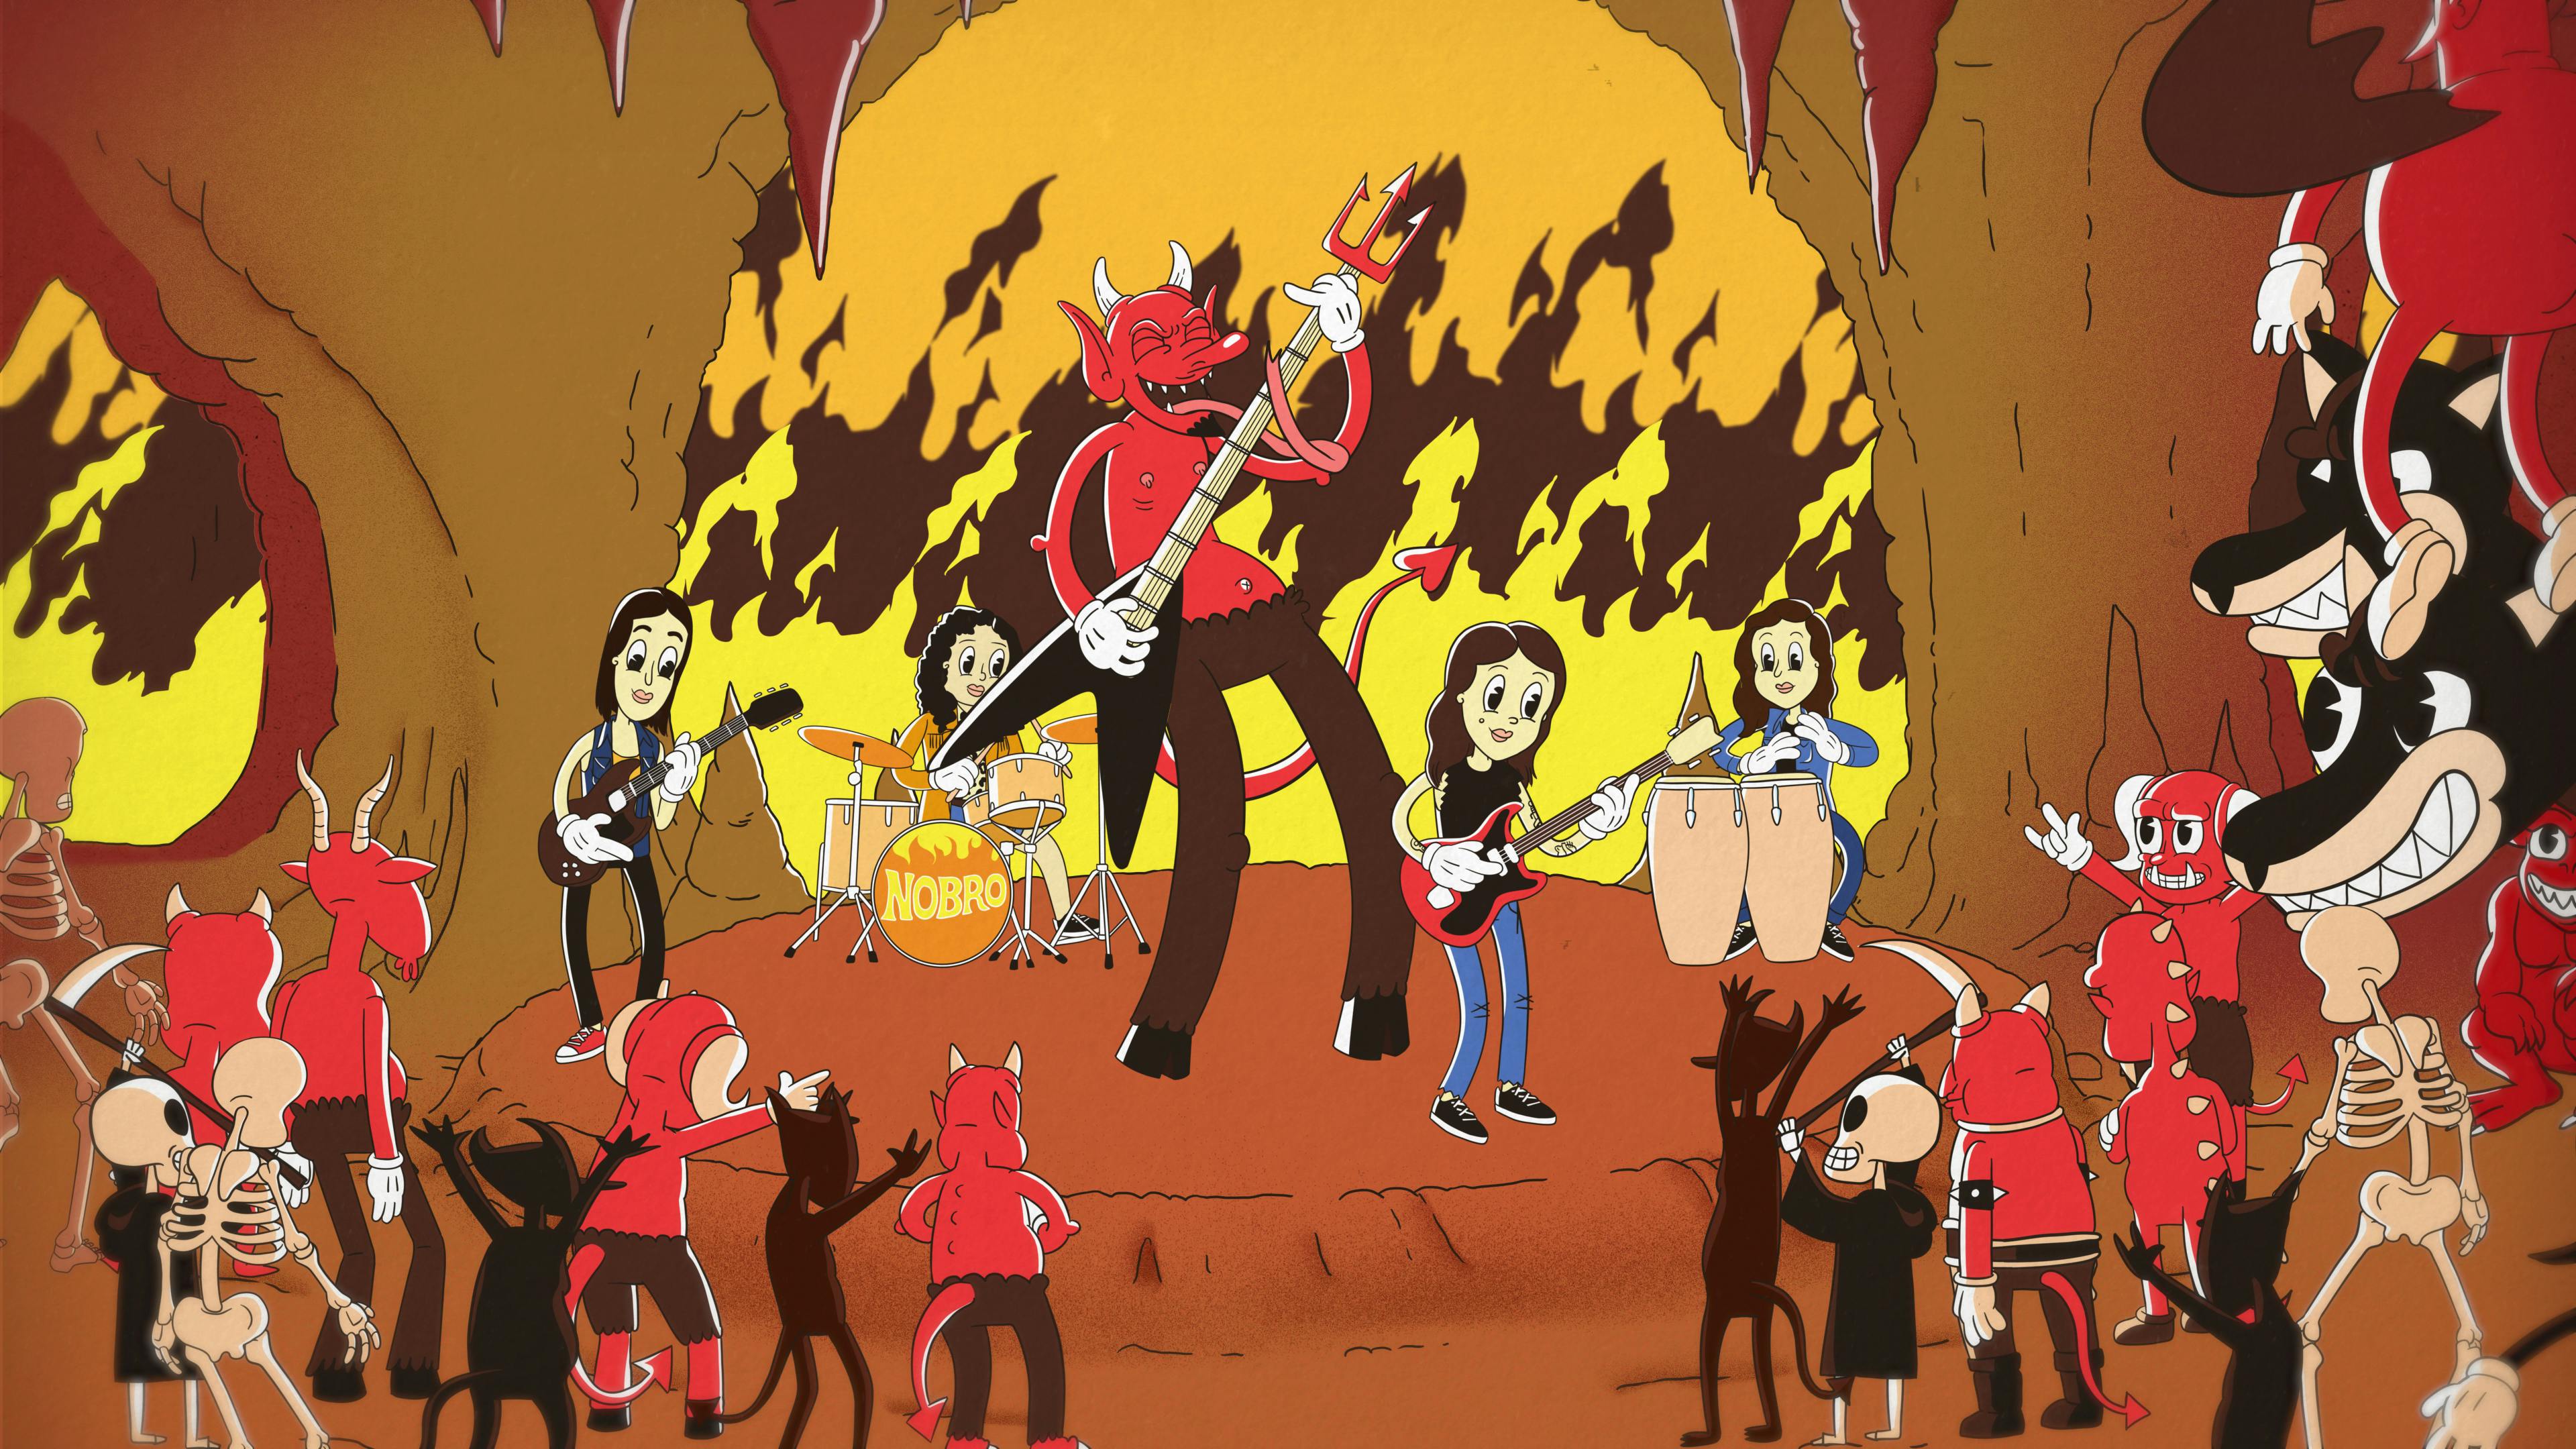 The band Nobro jams in Hell with the devil on guitar and an audience of skeletons and demons